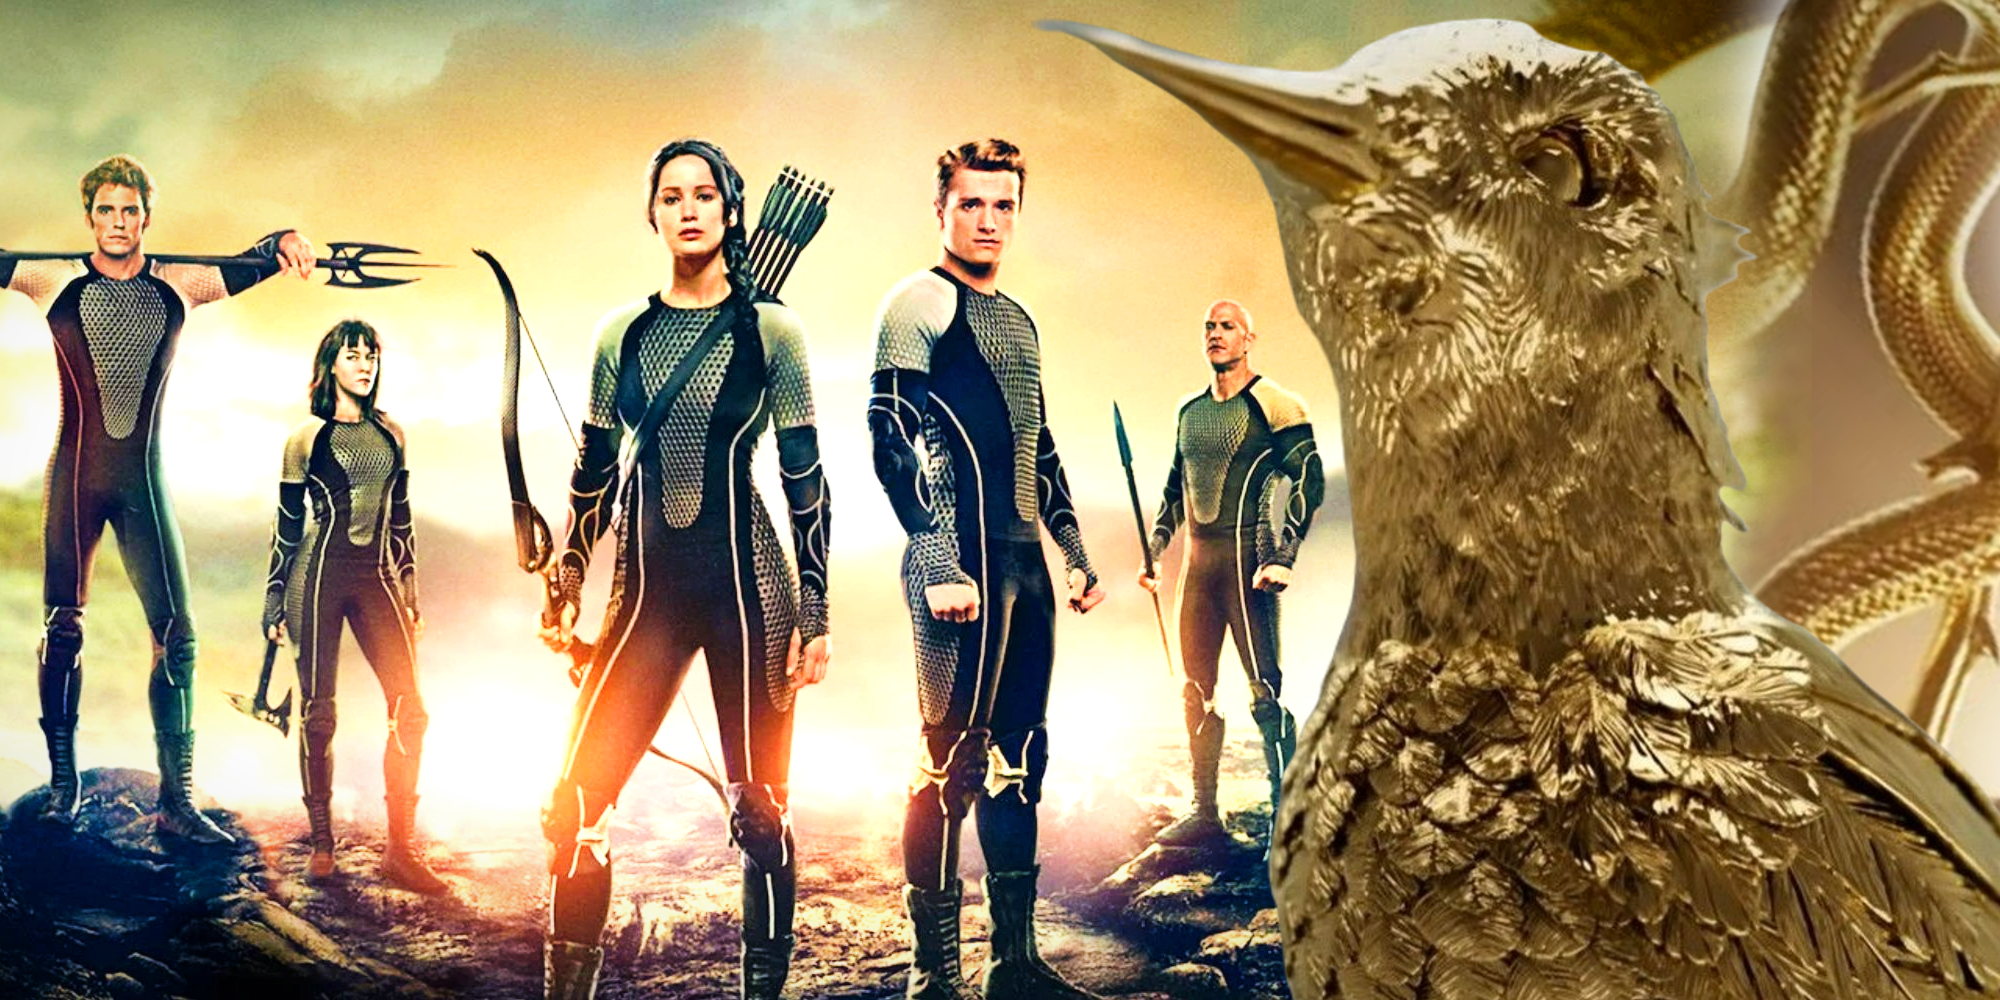 Will The Hunger Games: The Ballad of Songbirds and Snakes be in